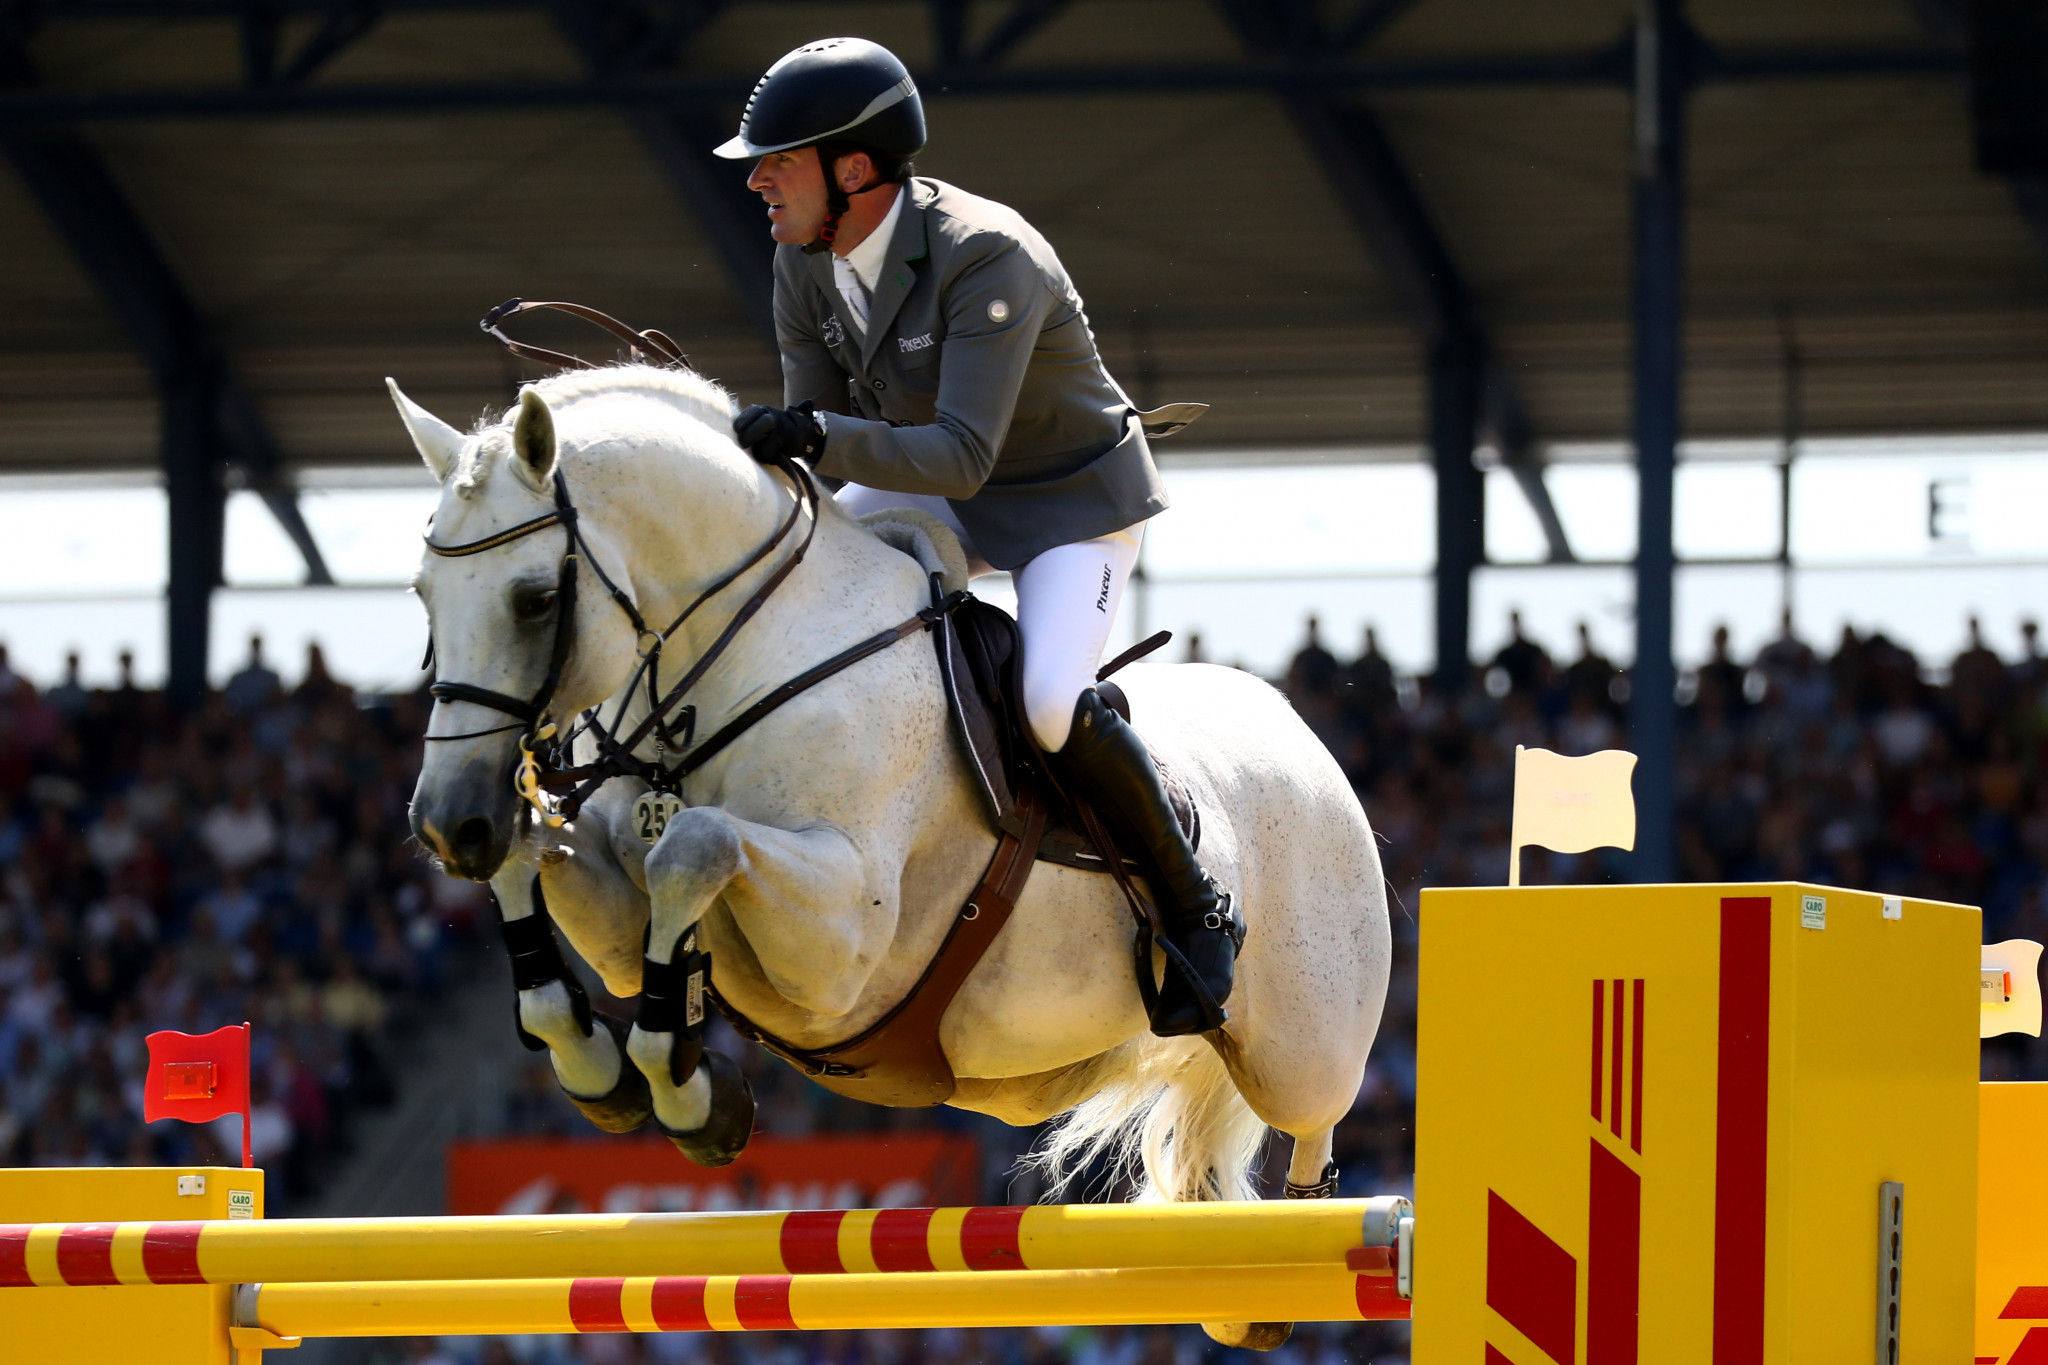 Philipp Weishaupt was part of the victorious German team ©Getty Images